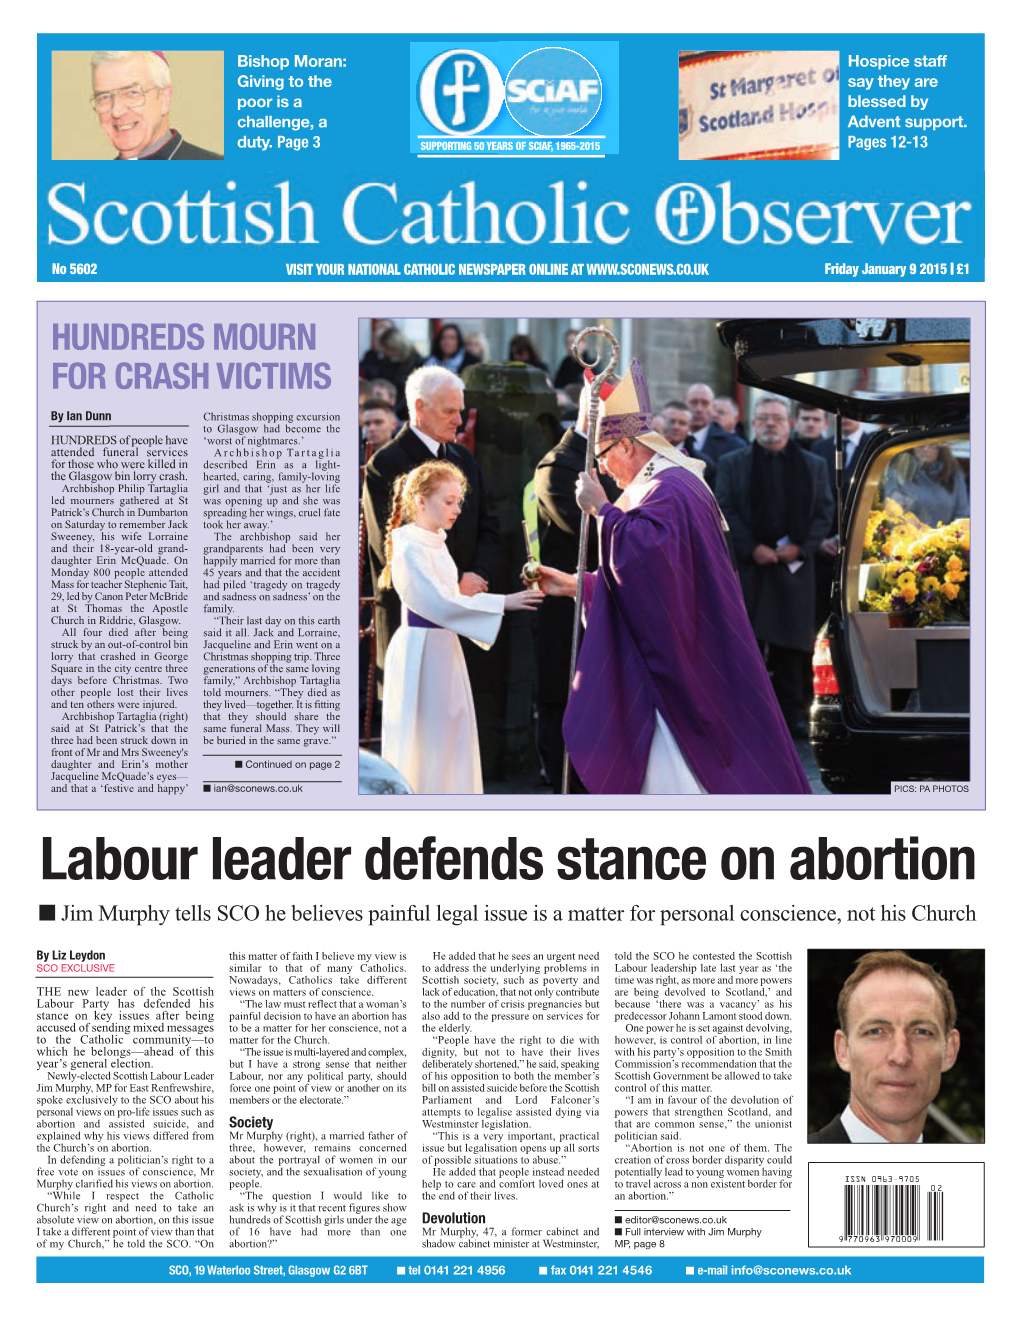 Labour Leader Defends Stance on Abortion I Jim Murphy Tells SCO He Believes Painful Legal Issue Is a Matter for Personal Conscience, Not His Church